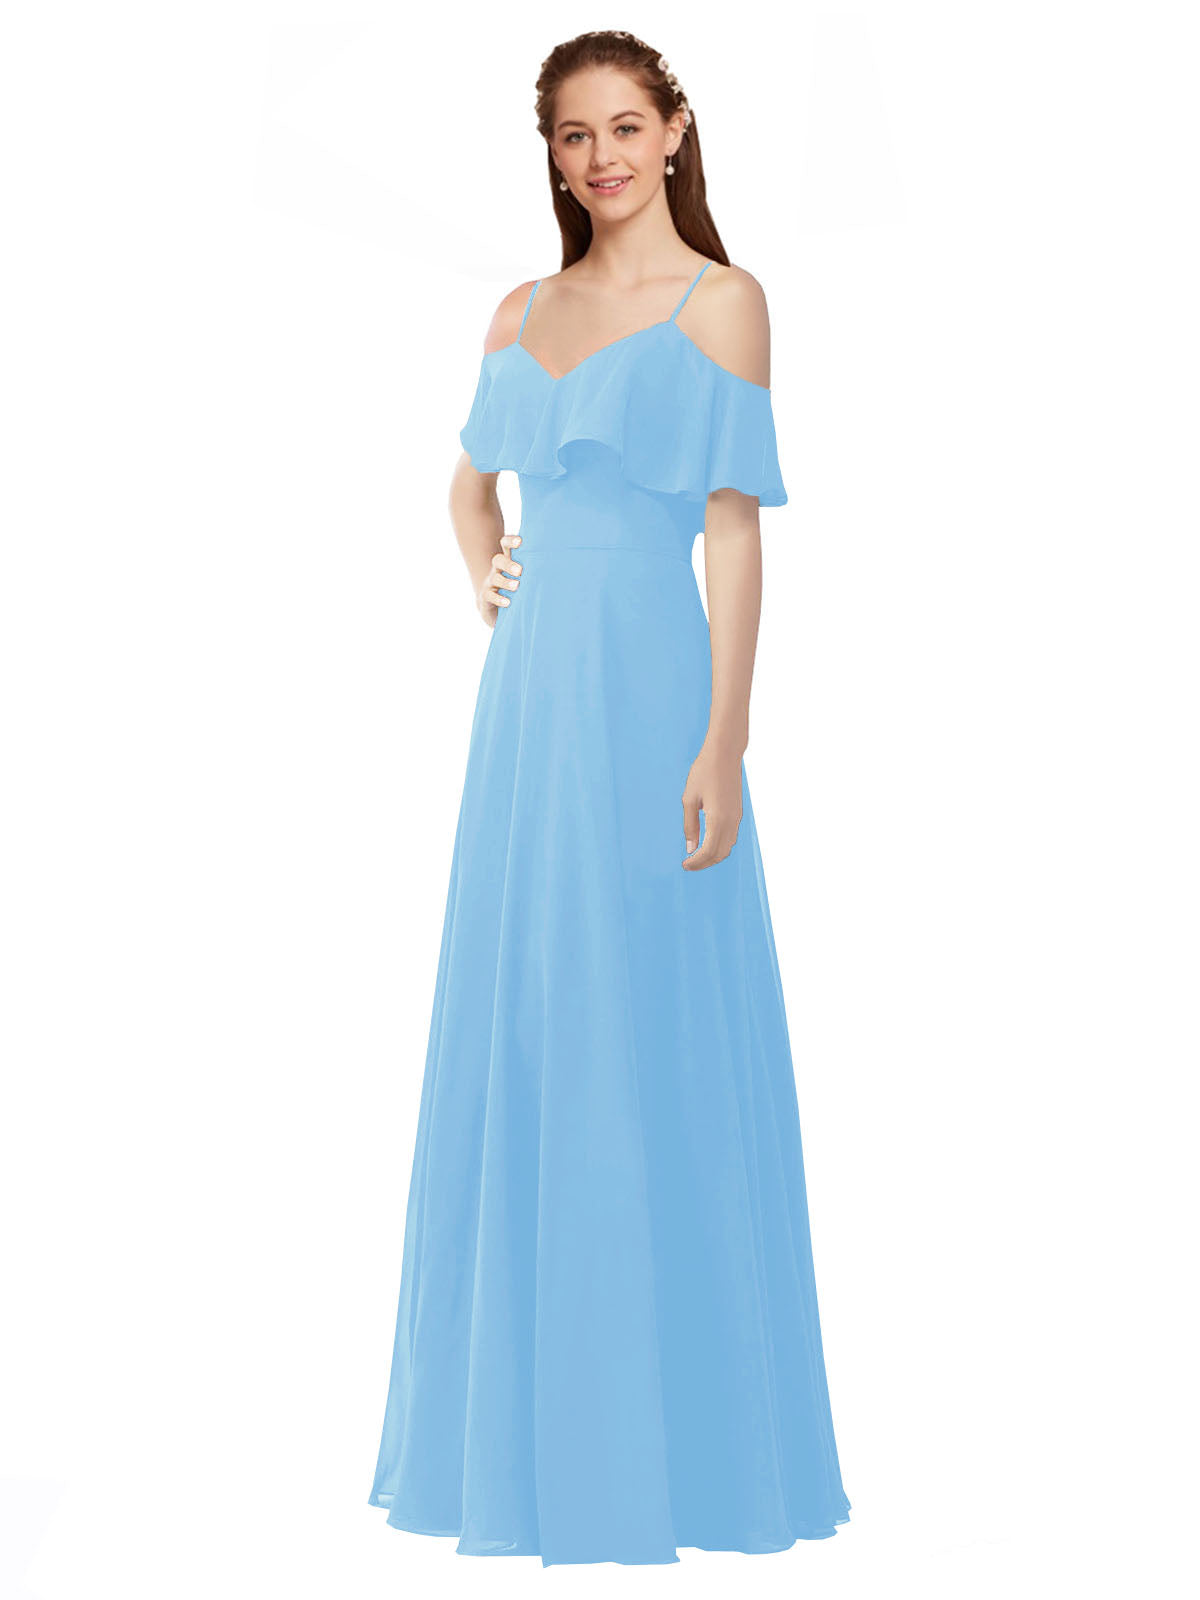 Periwinkle A-Line Off the Shoulder V-Neck Sleeveless Long Bridesmaid Dress Marianna